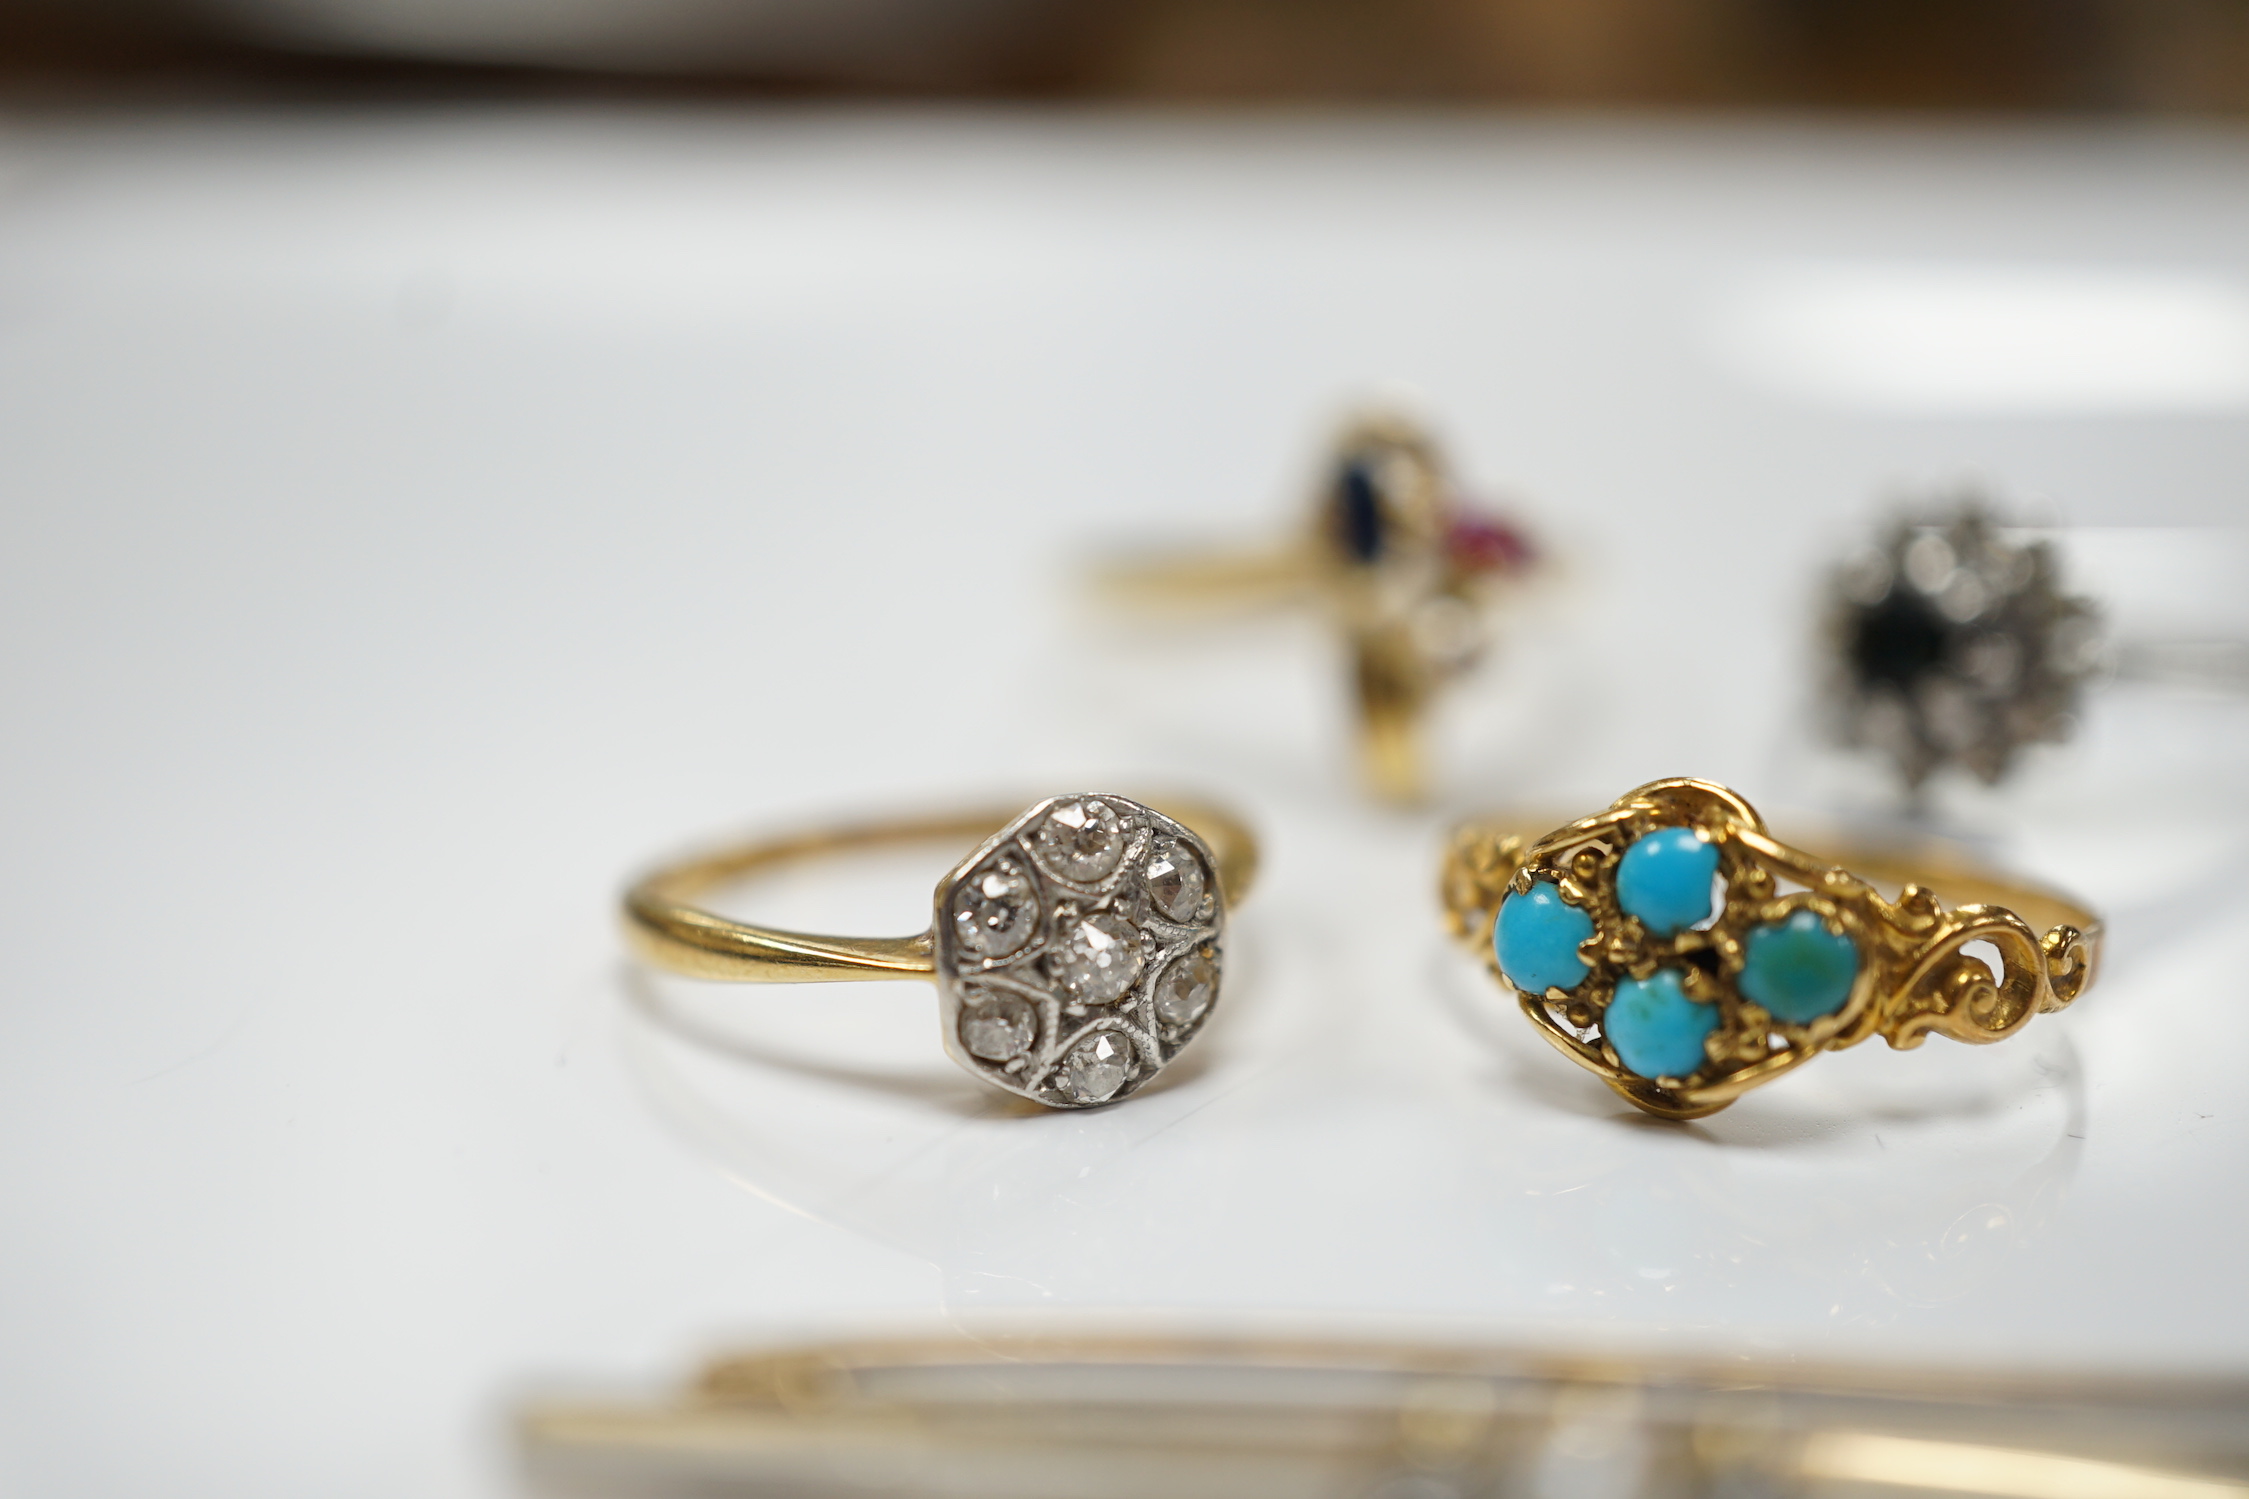 Three assorted 18ct and gem set rings, including 1920's diamond cluster, size K/L, one other early 20th century yellow metal and turquoise cluster set ring and a 15ct, diamond and seed pearl set three stone bar brooch.